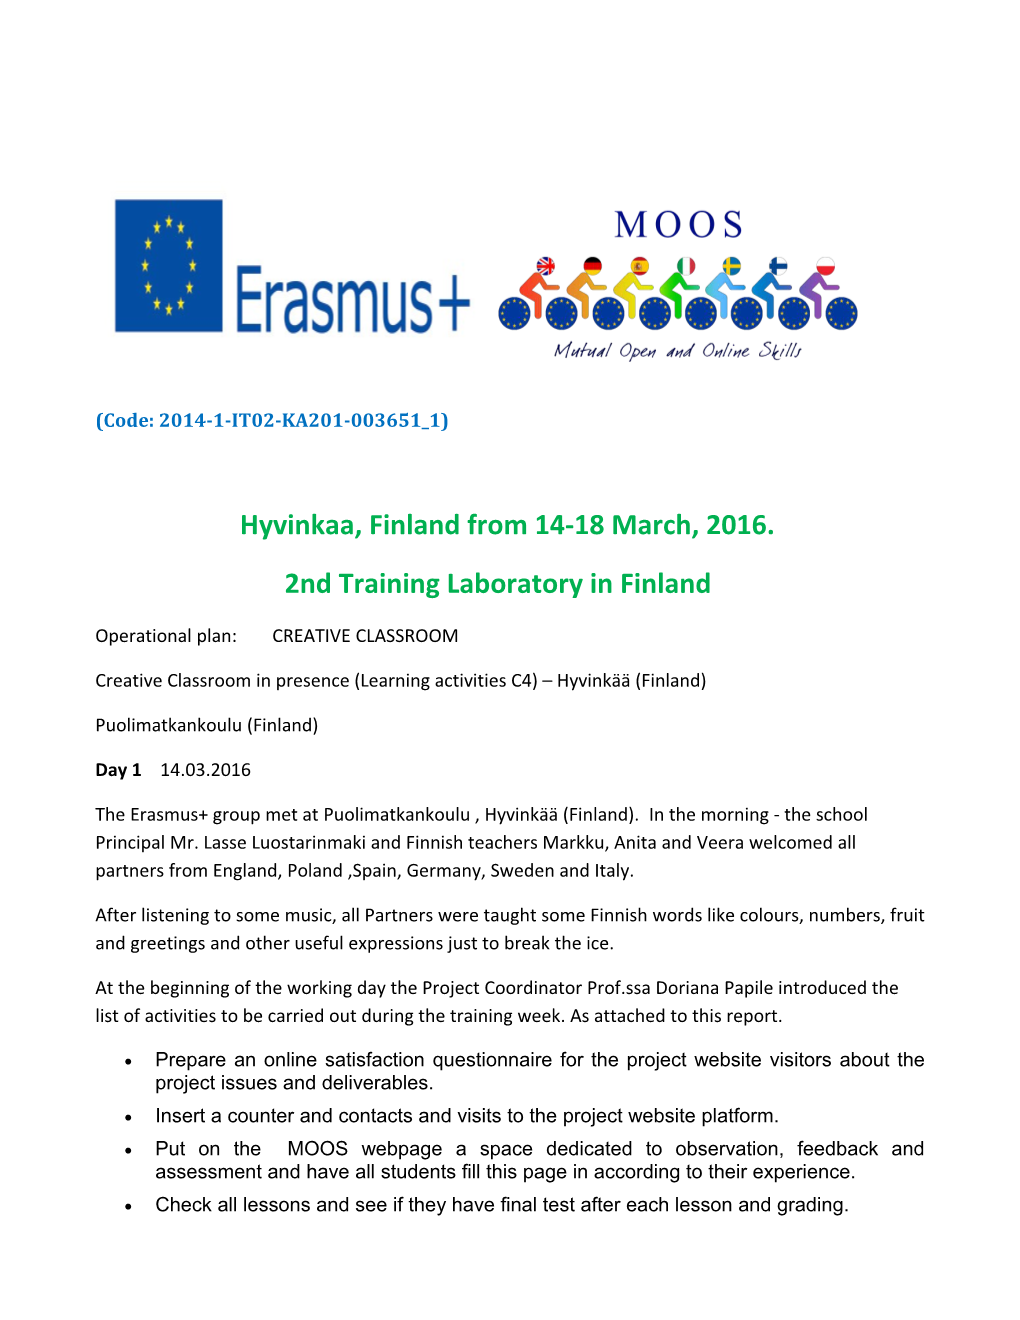 Hyvinkaa, Finland from 14-18 March, 2016